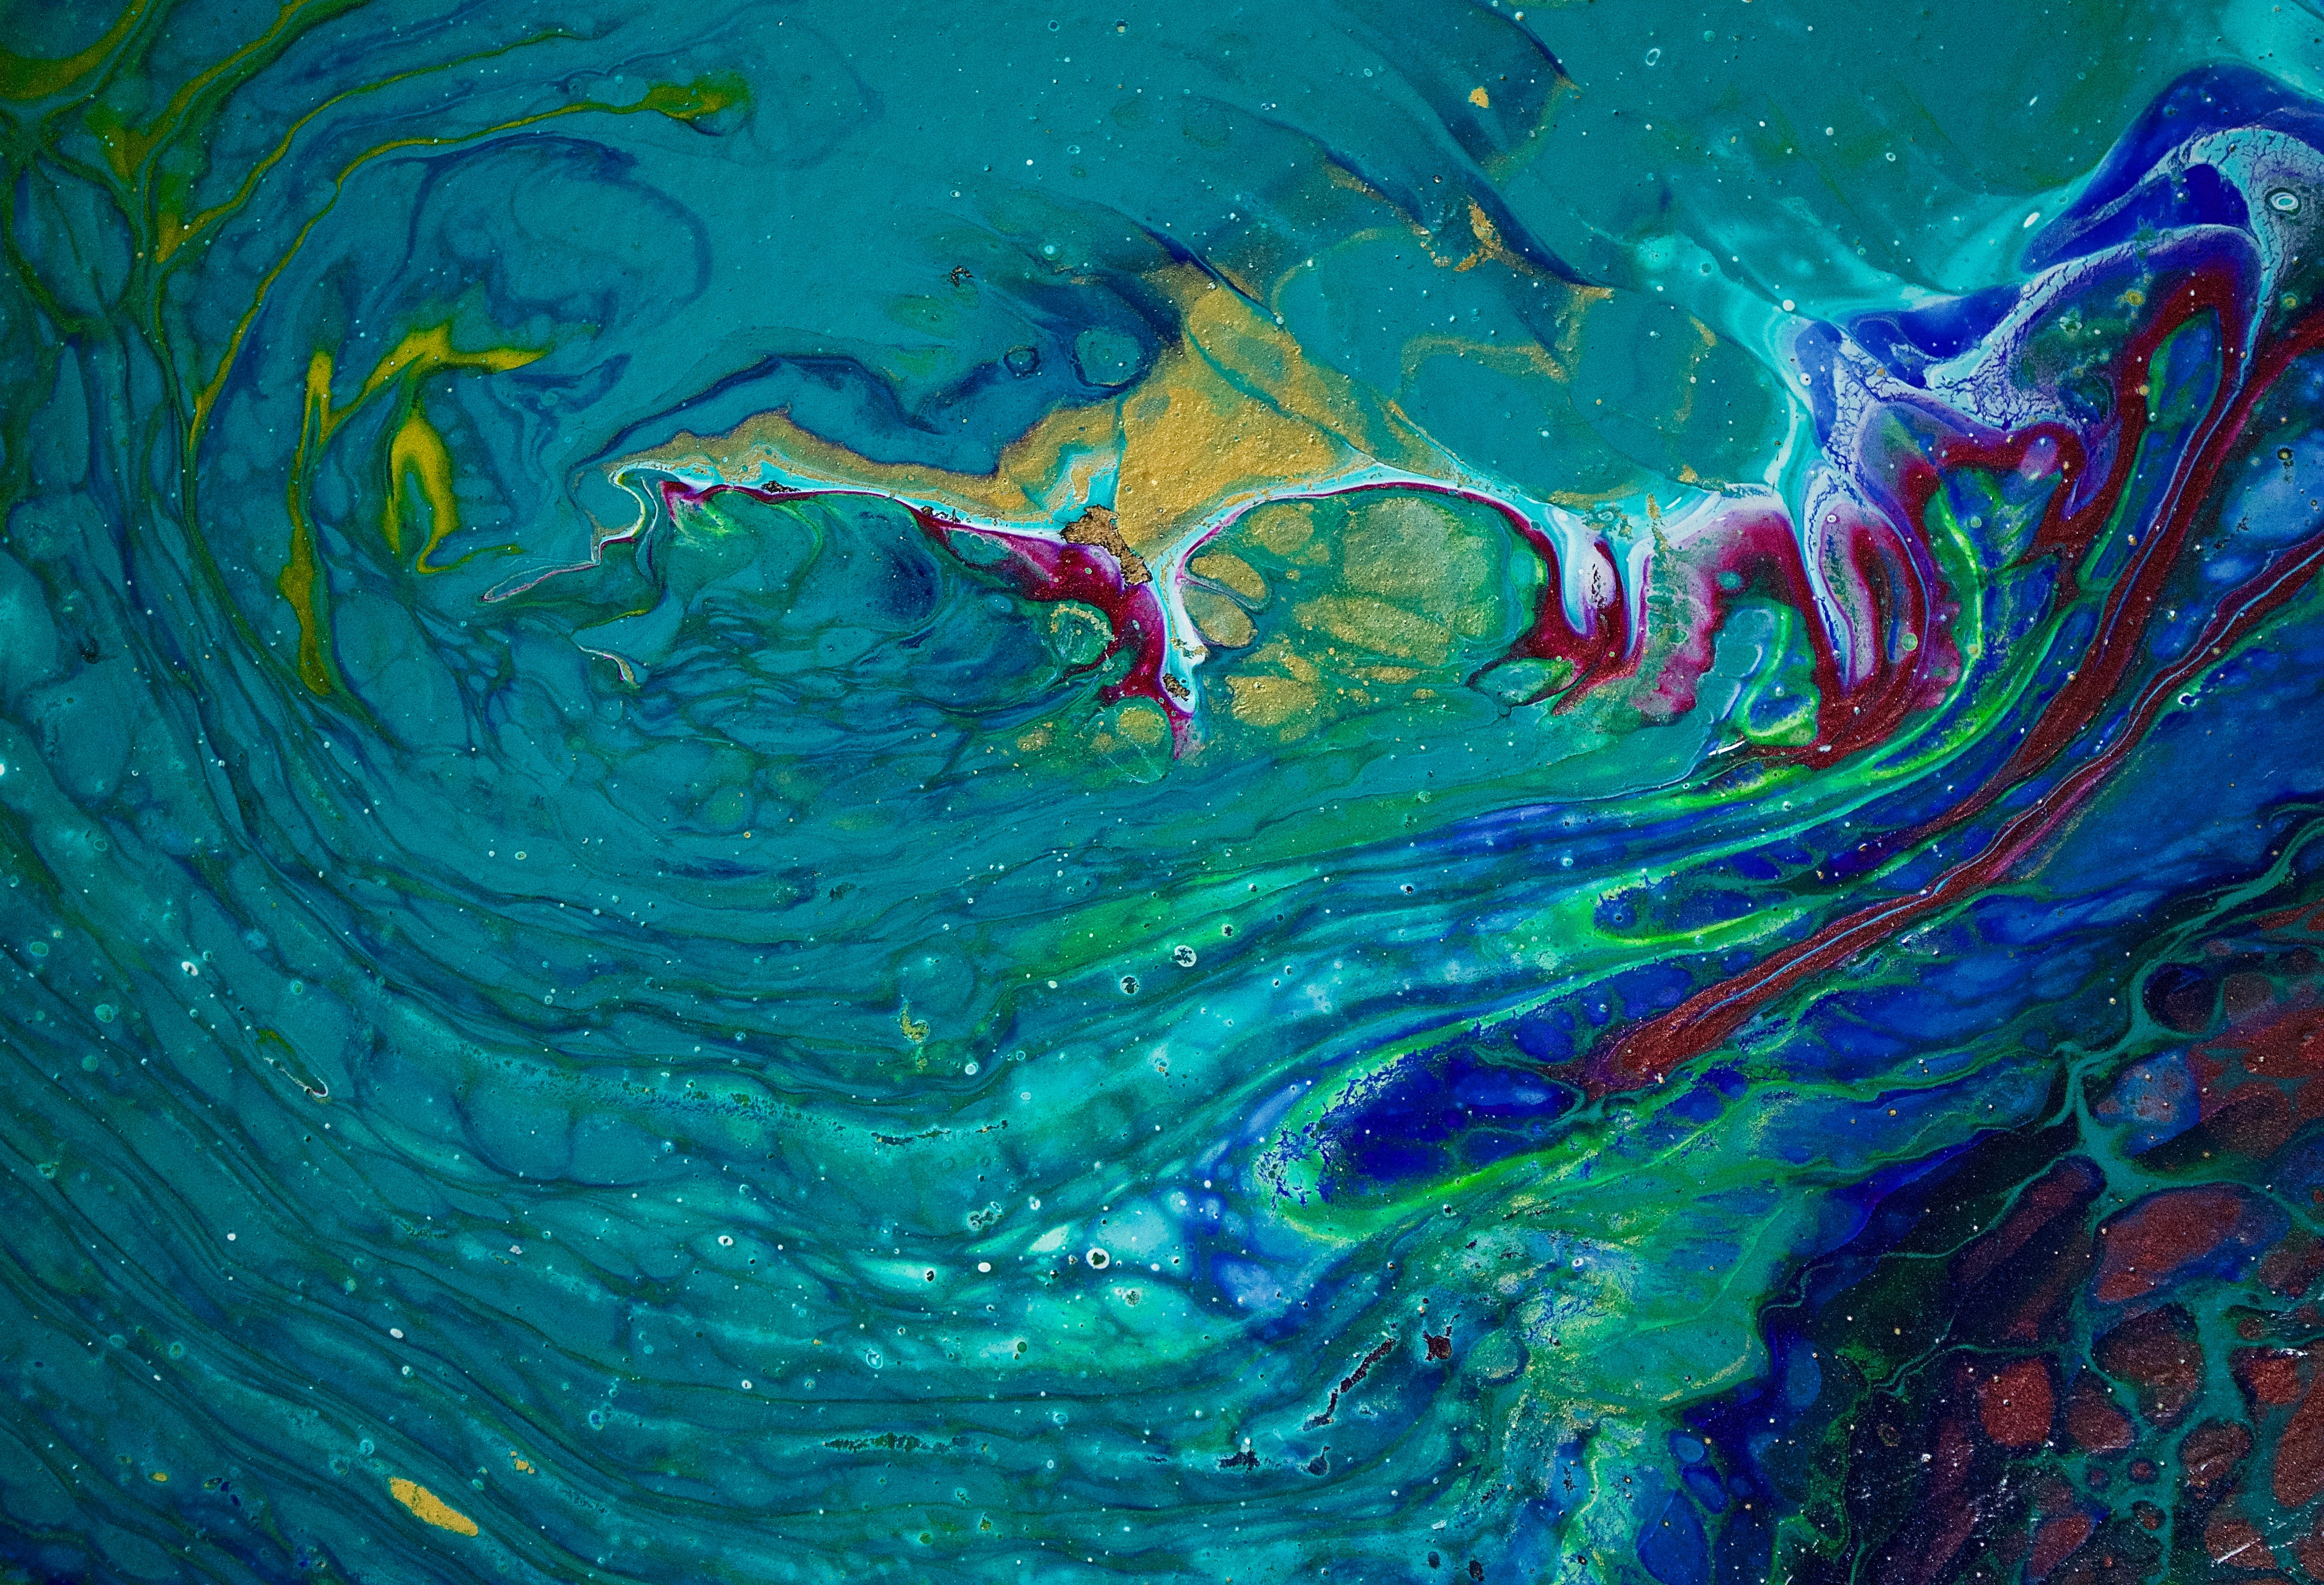 STIRRING THE POND 1, PAINTING BY EPIC TALES ART